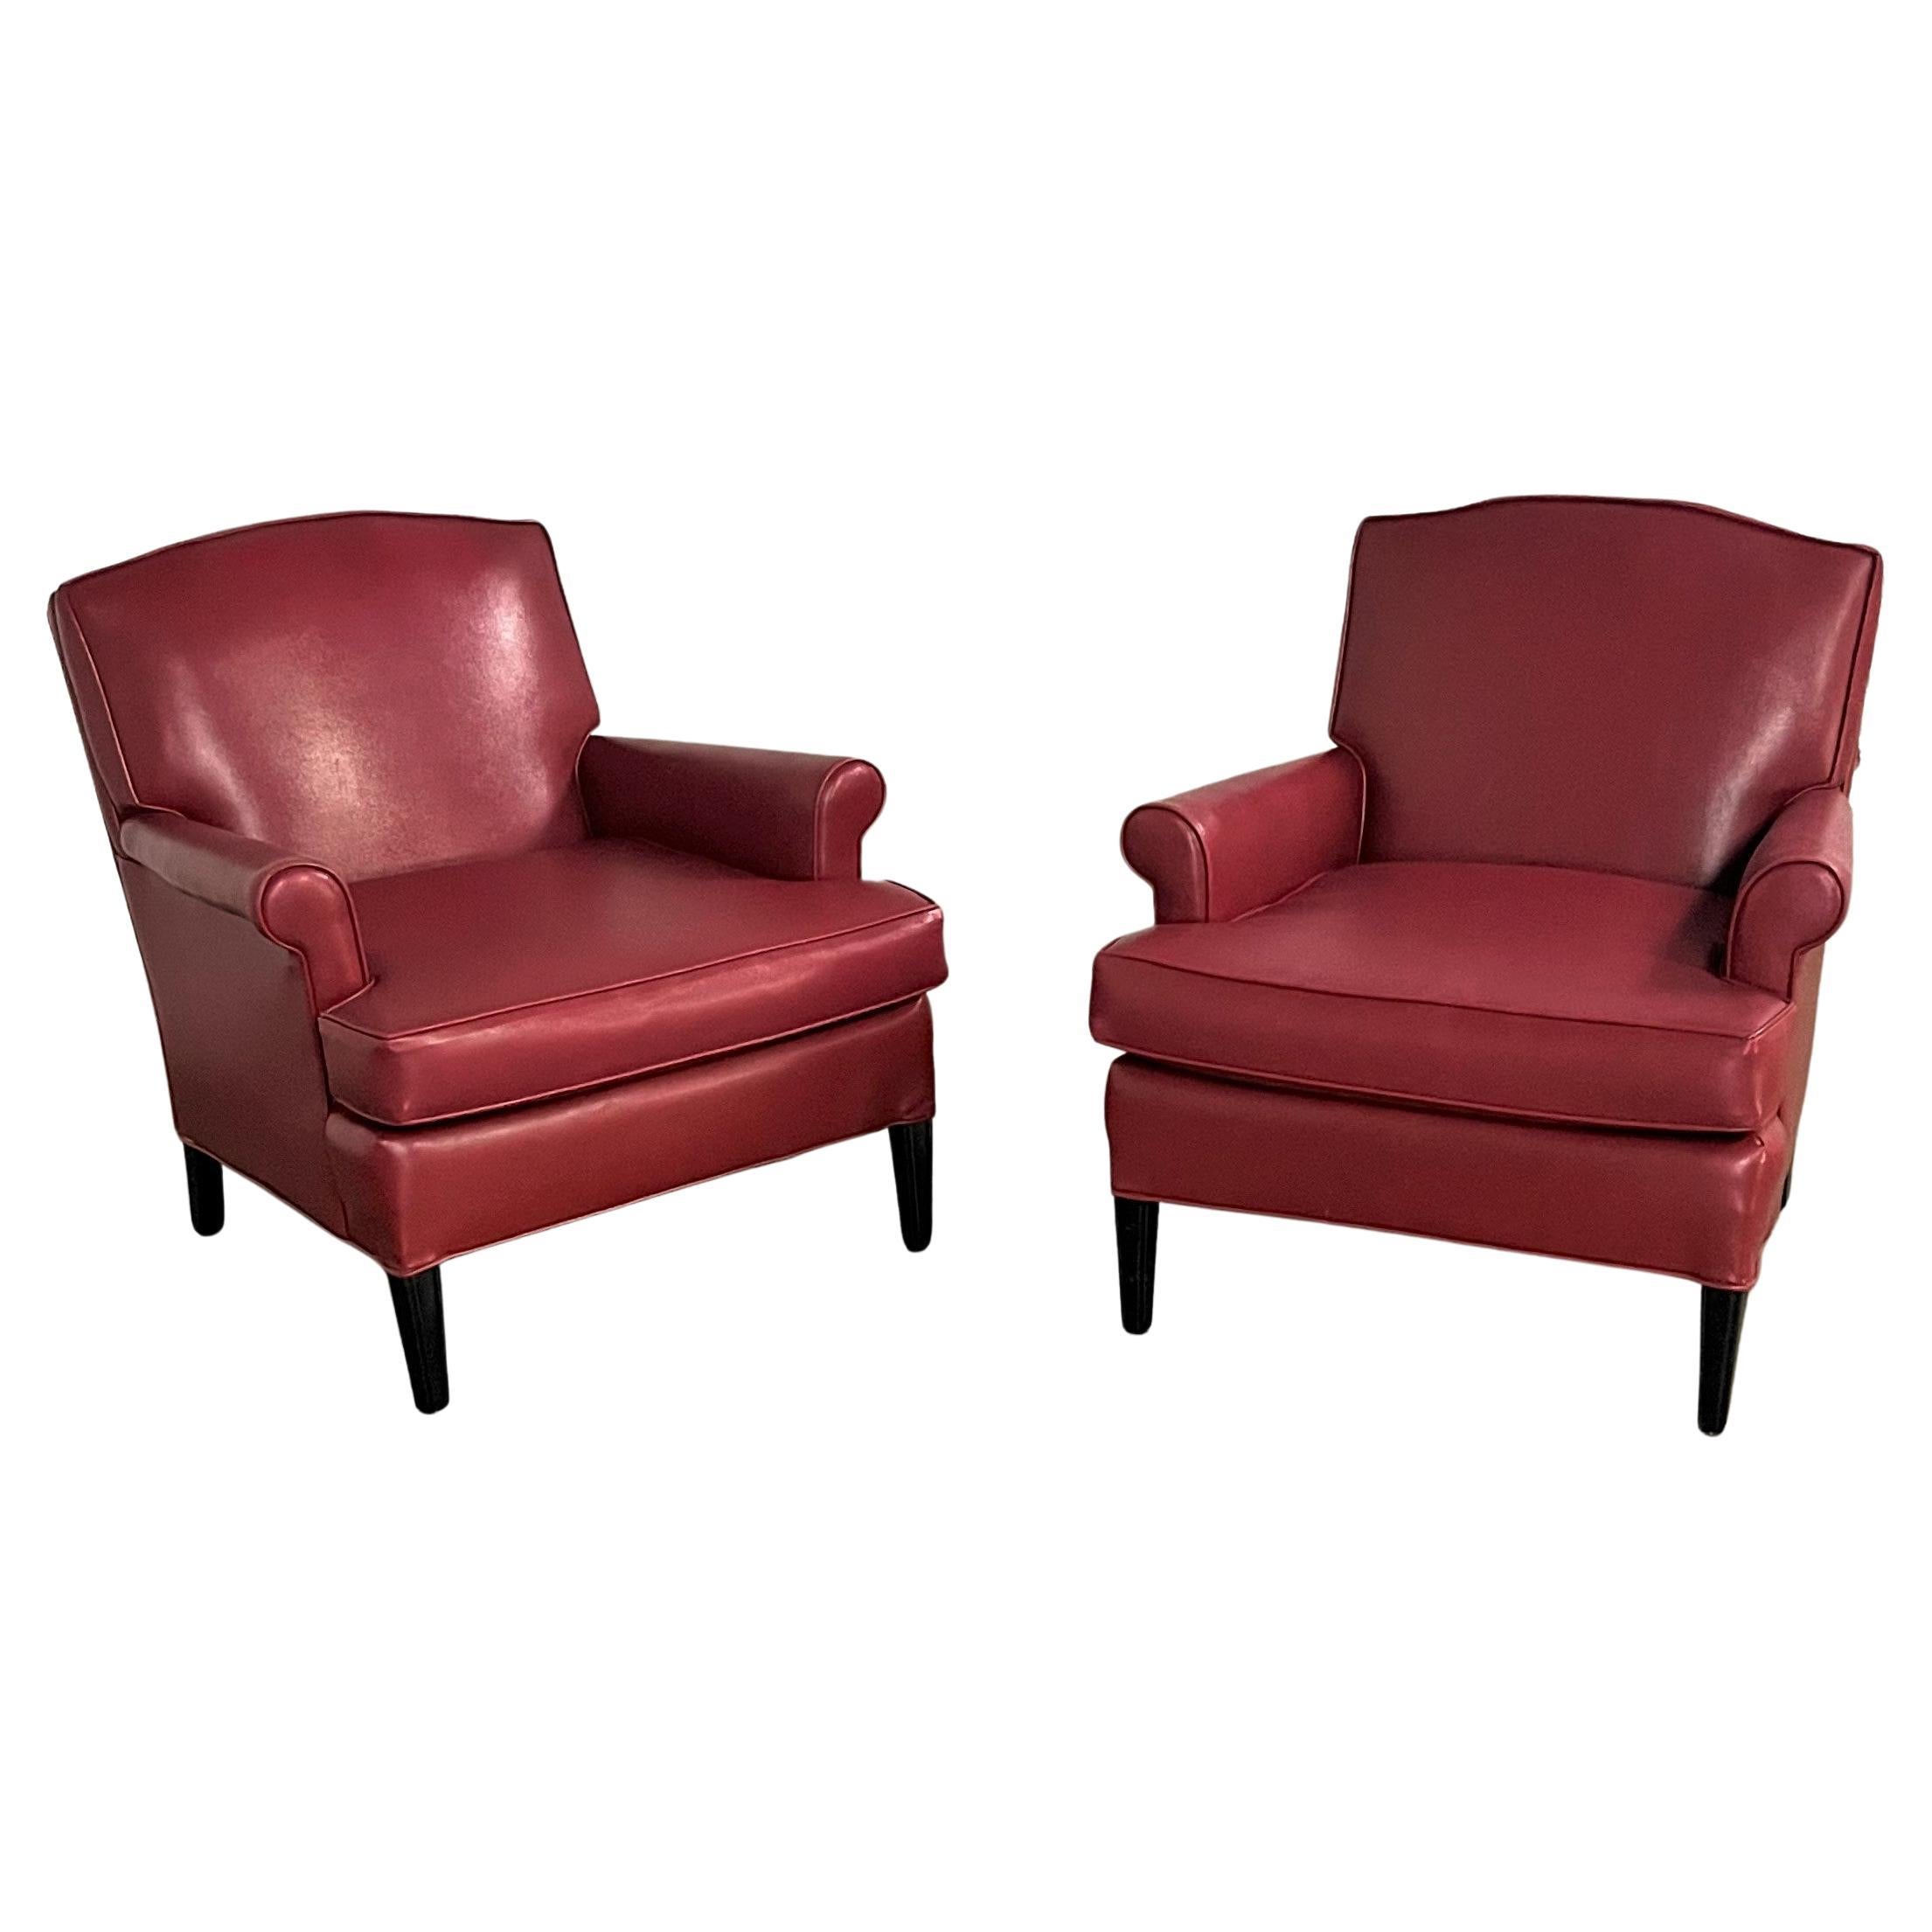 1940’s Traditional Club Chairs Original Red Faux Leather & Wood Legs a Pair For Sale